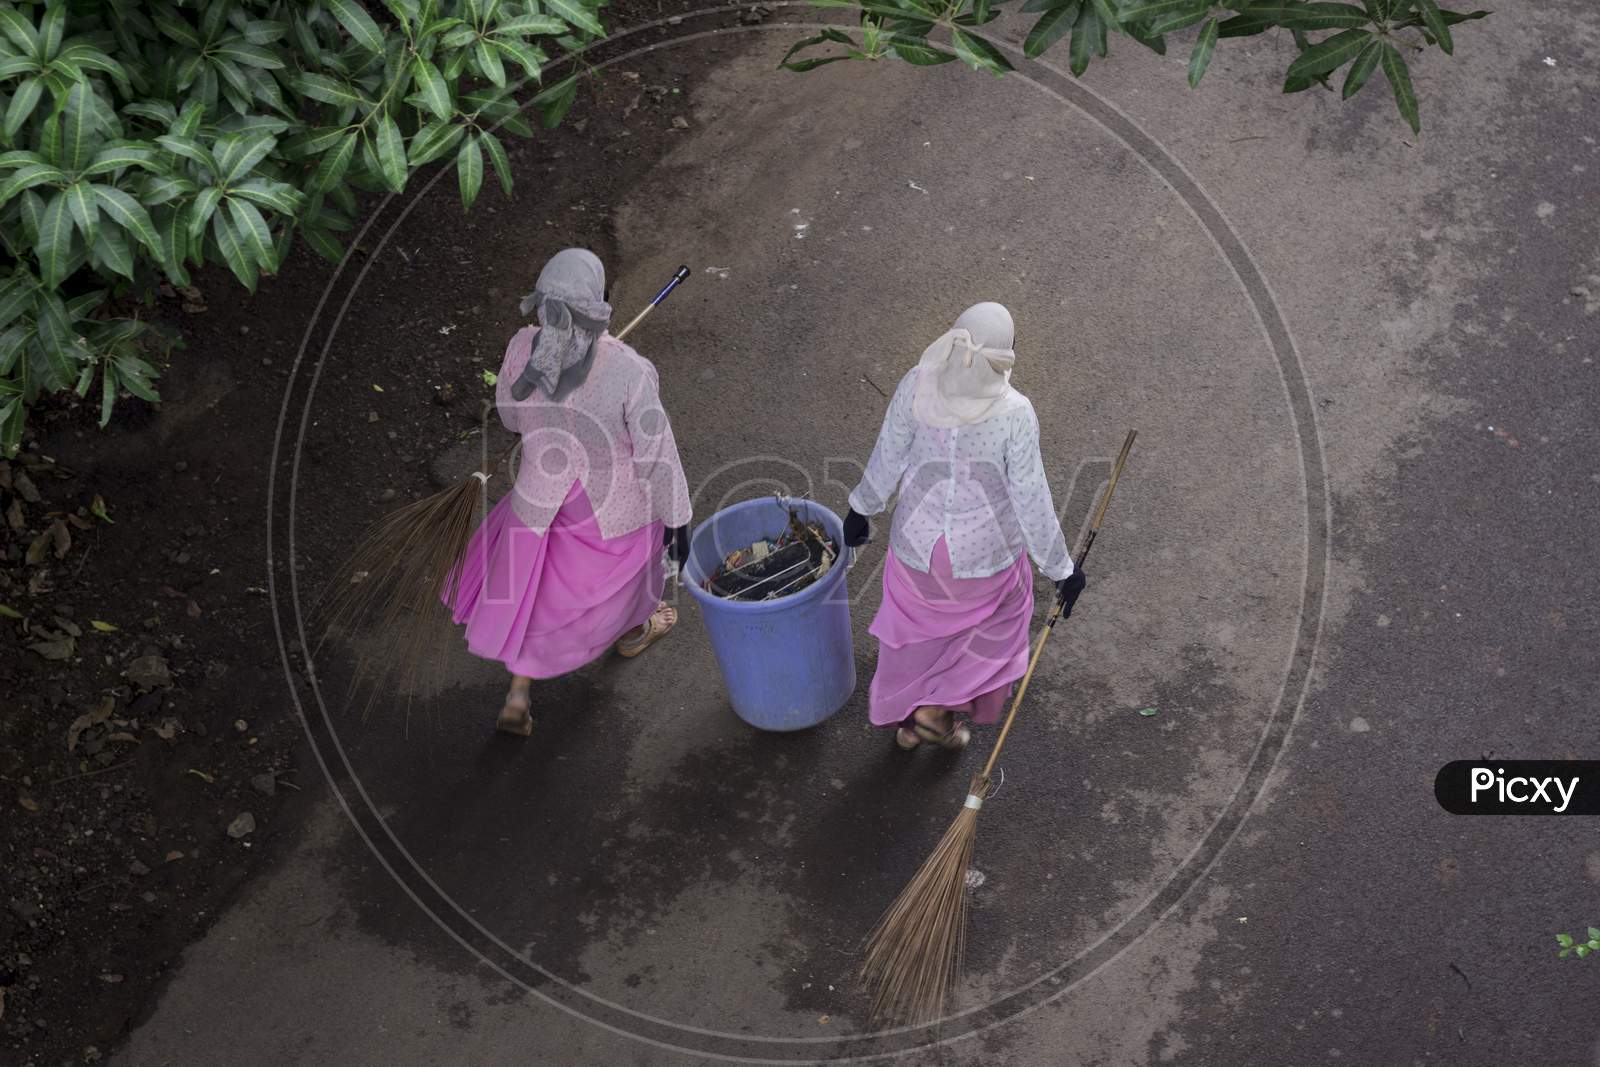 Road Sweeper ladies cleaning city roads with broom